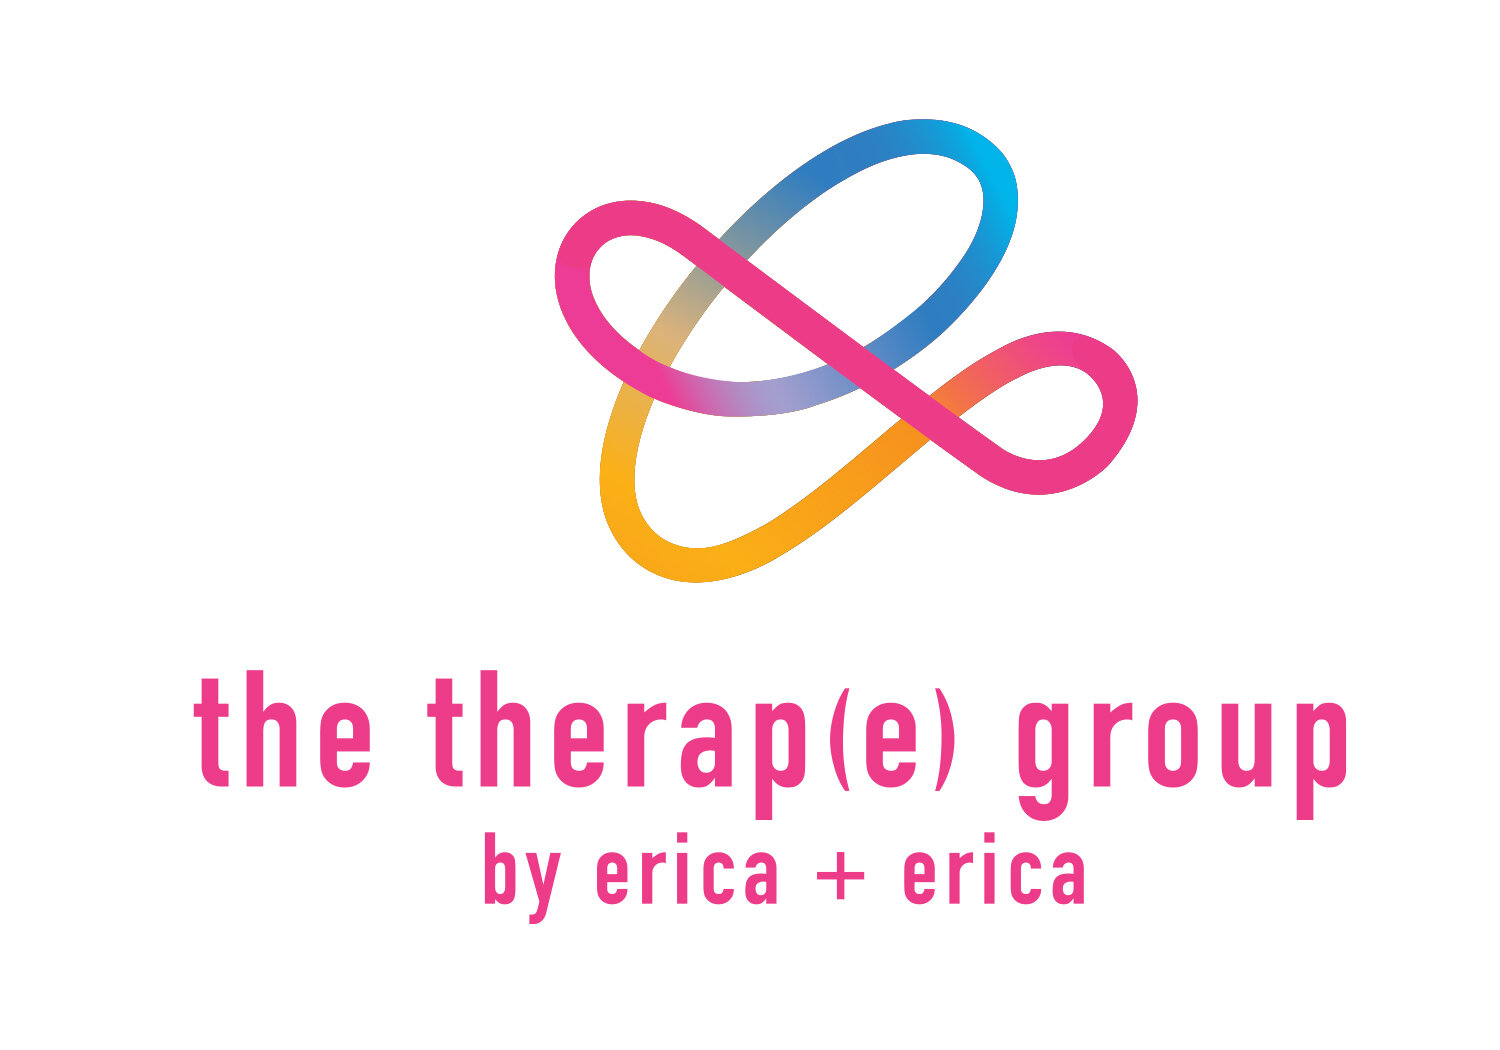 the therap(e) group